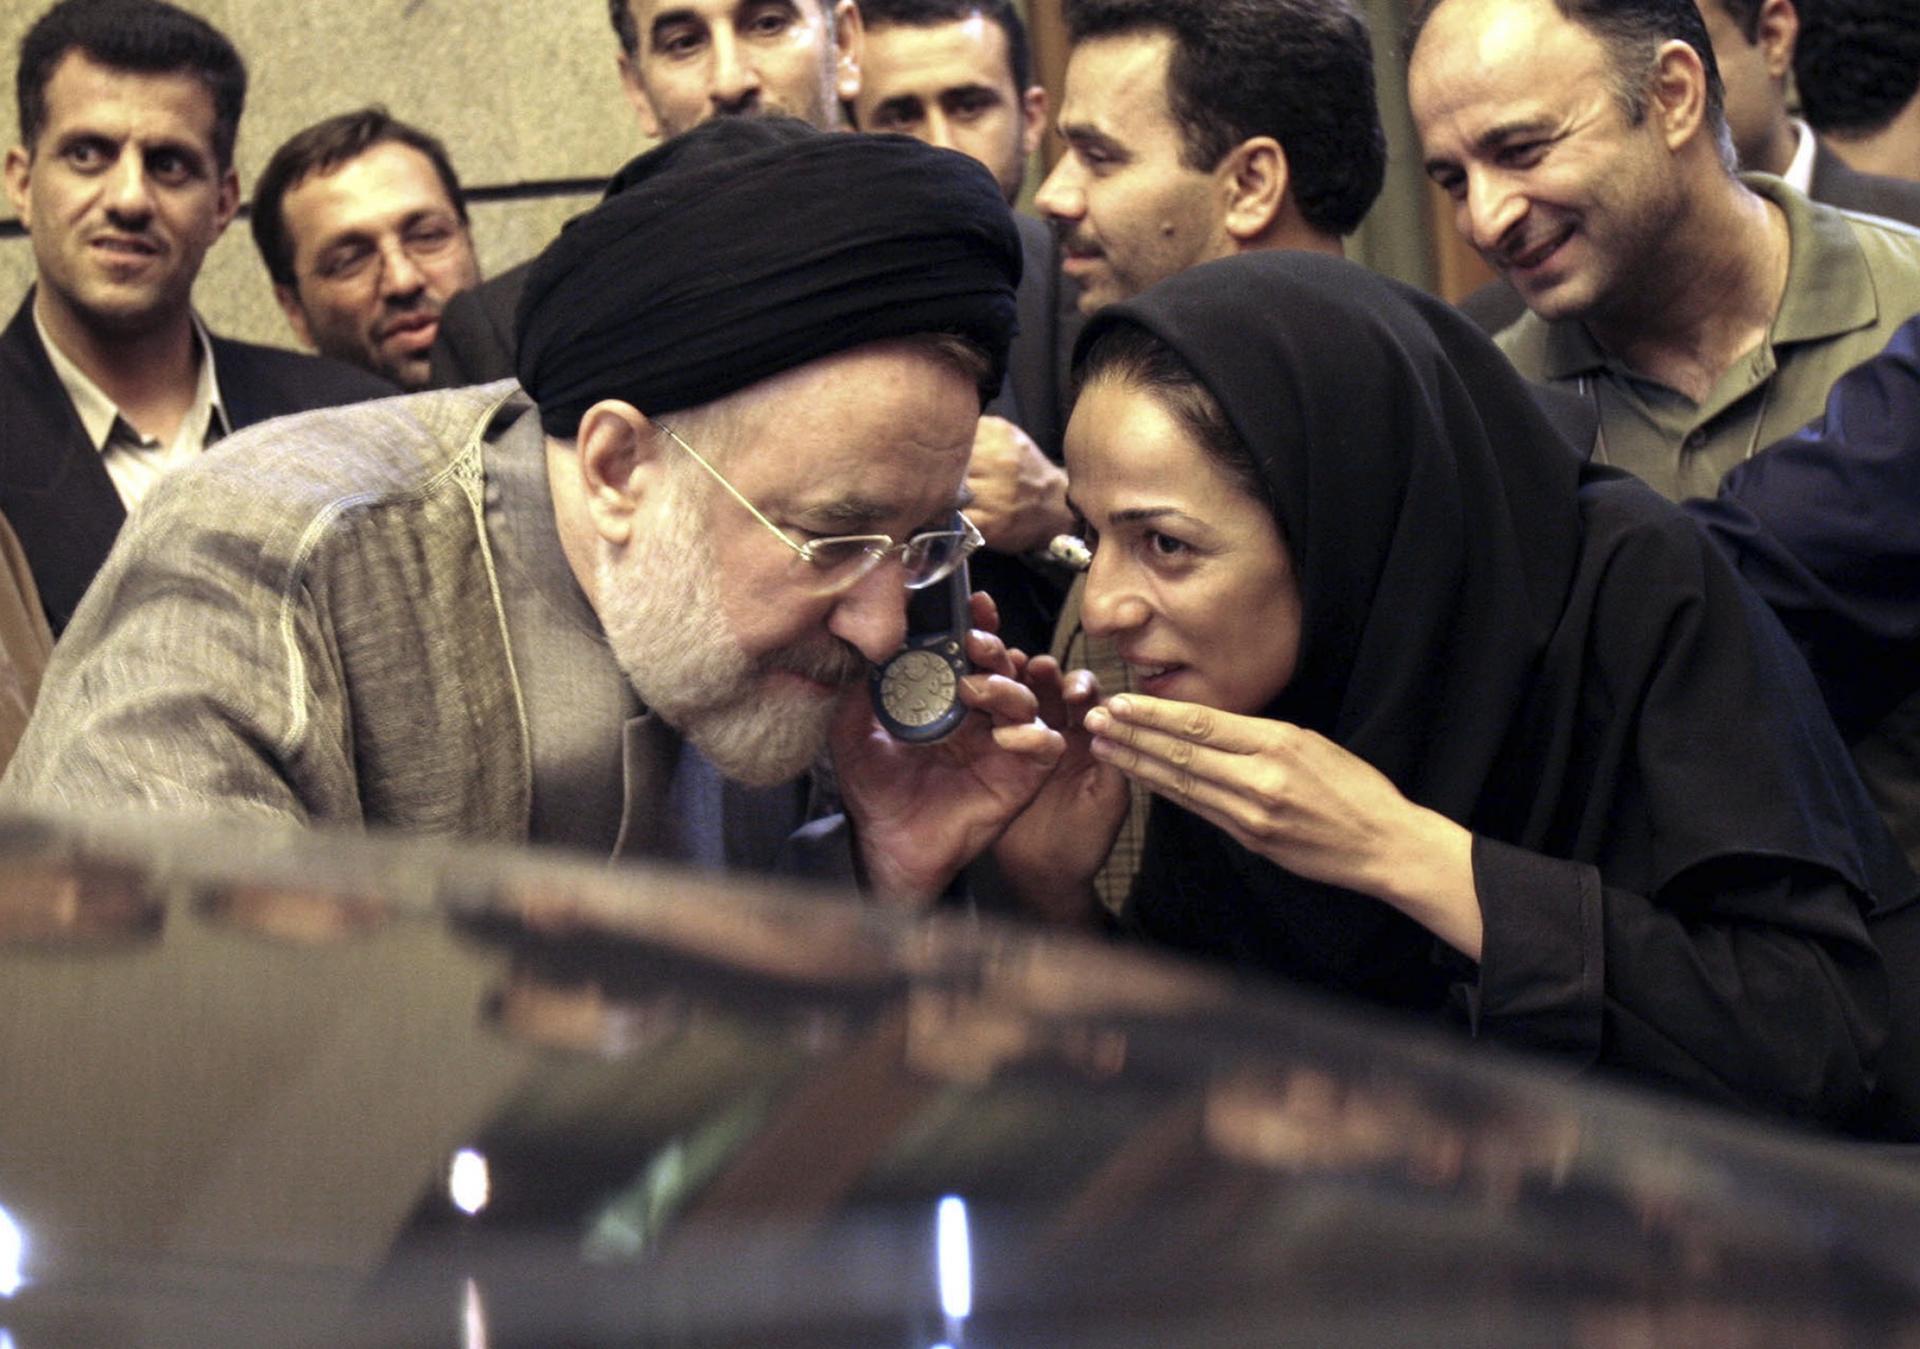 Outgoing reformist Iranian President Mohammad Khatami talks on the phone with the mother of female journalist Masih Alinejad, right, after meeting with journalists in Tehran, Iran, July 13, 2005.